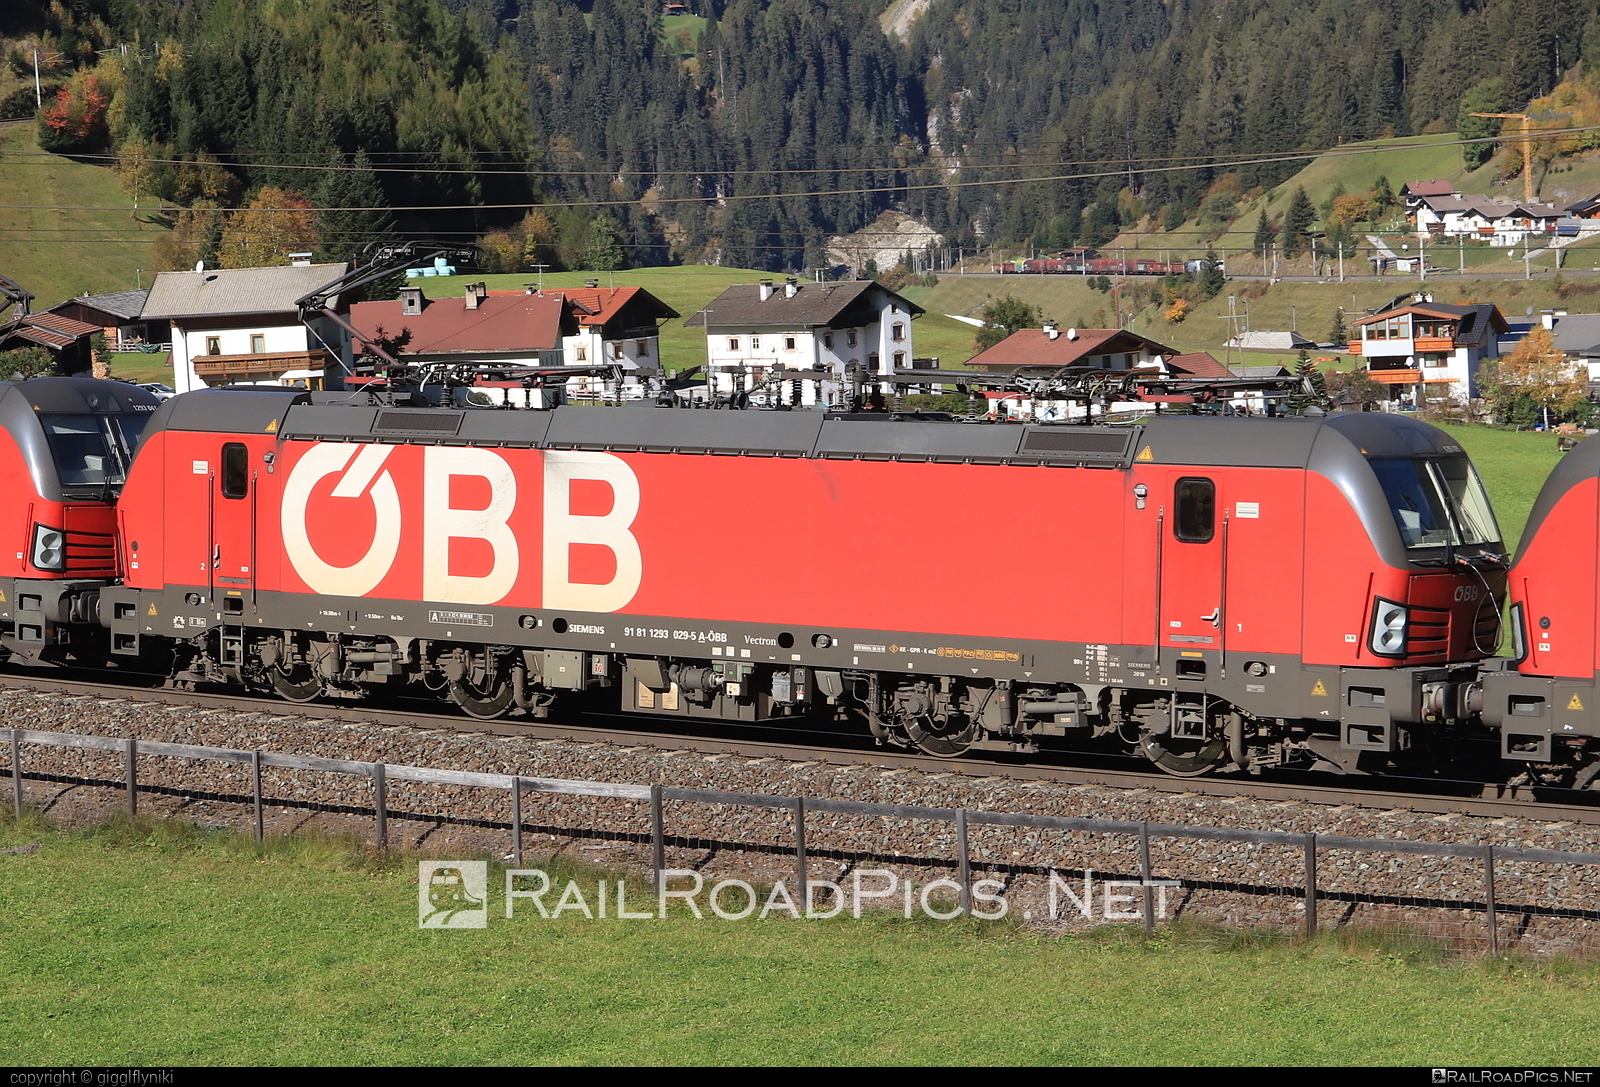 Siemens Vectron MS - 1293 029 operated by Österreichische Bundesbahnen #obb #osterreichischebundesbahnen #siemens #siemensVectron #siemensVectronMS #vectron #vectronMS